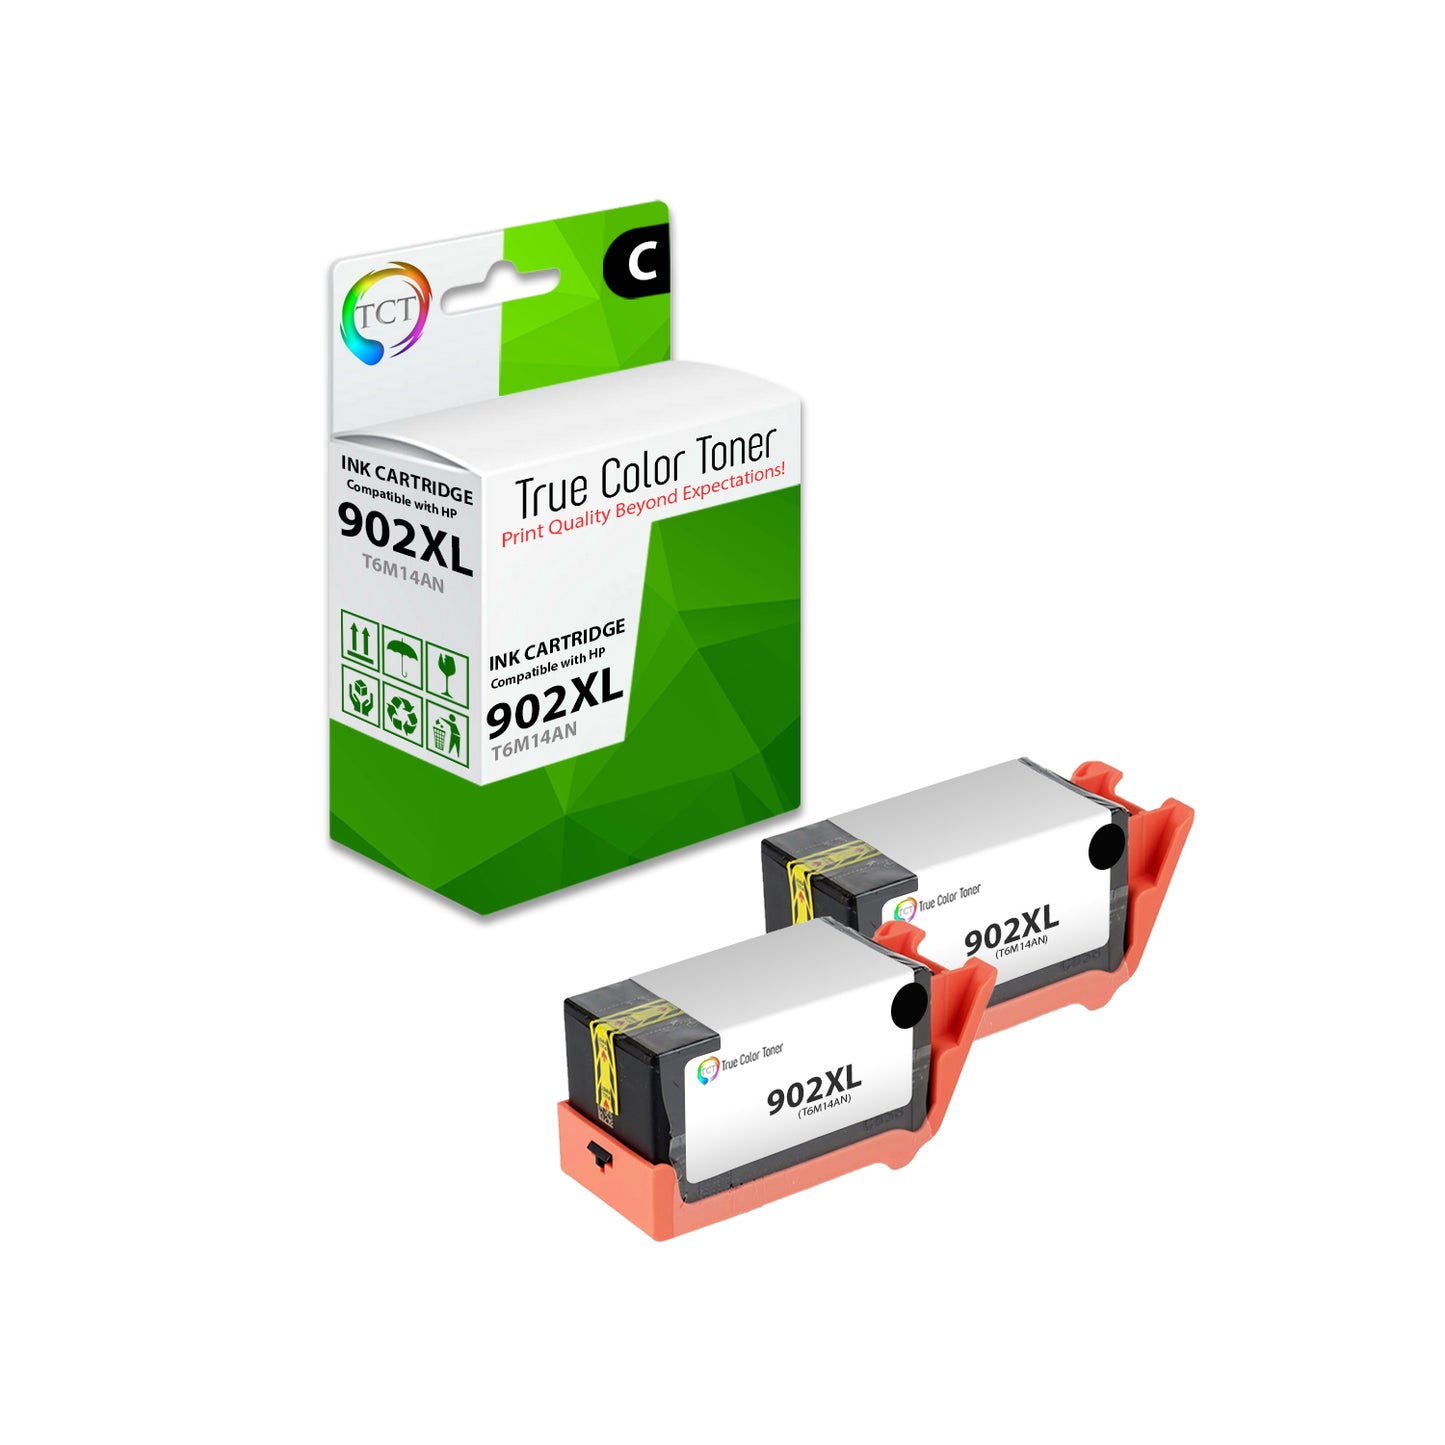 TCT Compatible Ink Cartridge Replacement for the HP 902XL Series - 2 Pack Black